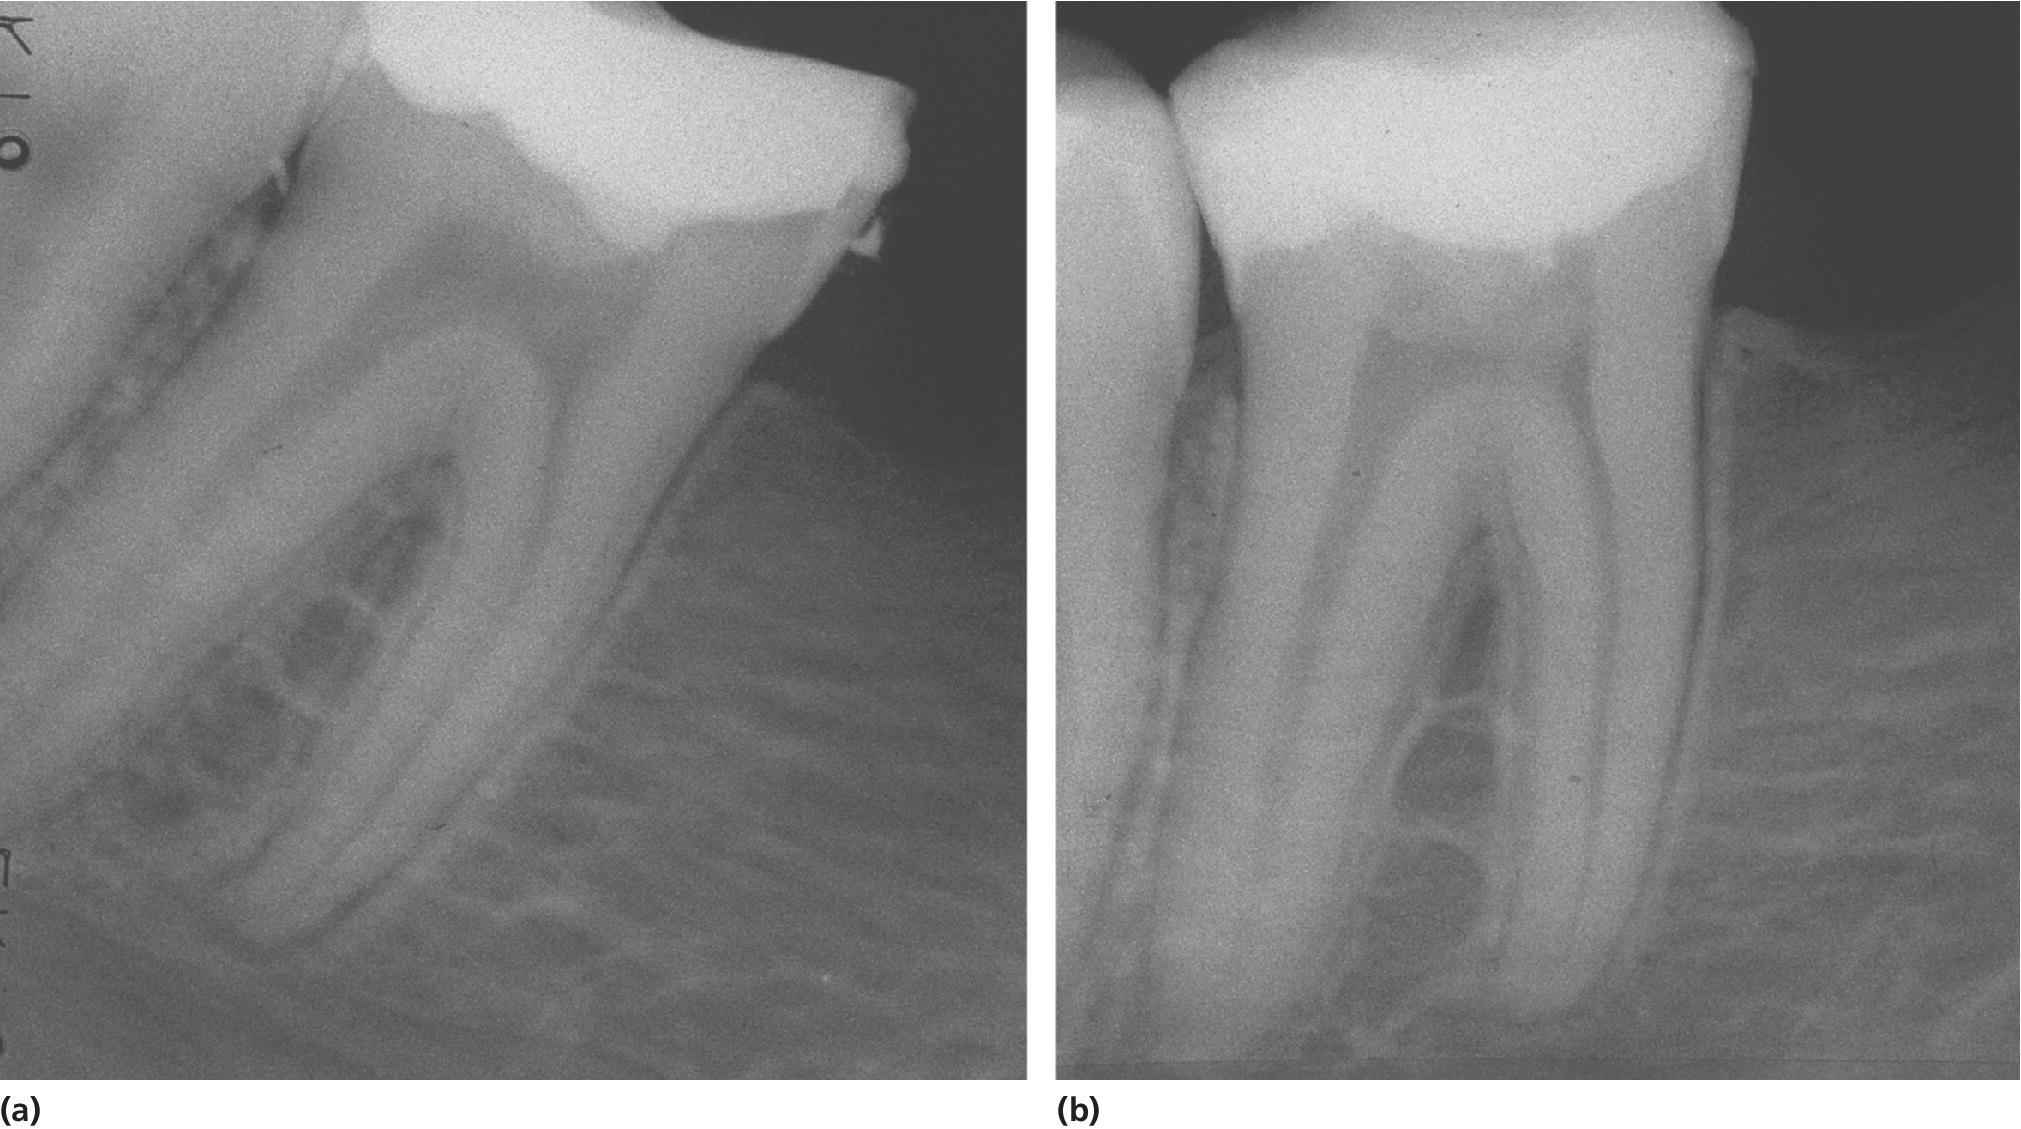 2 Radiographs of partial pulpotomy of permanent molar taken at the time of treatment (a) and 2 years after treatment (b).